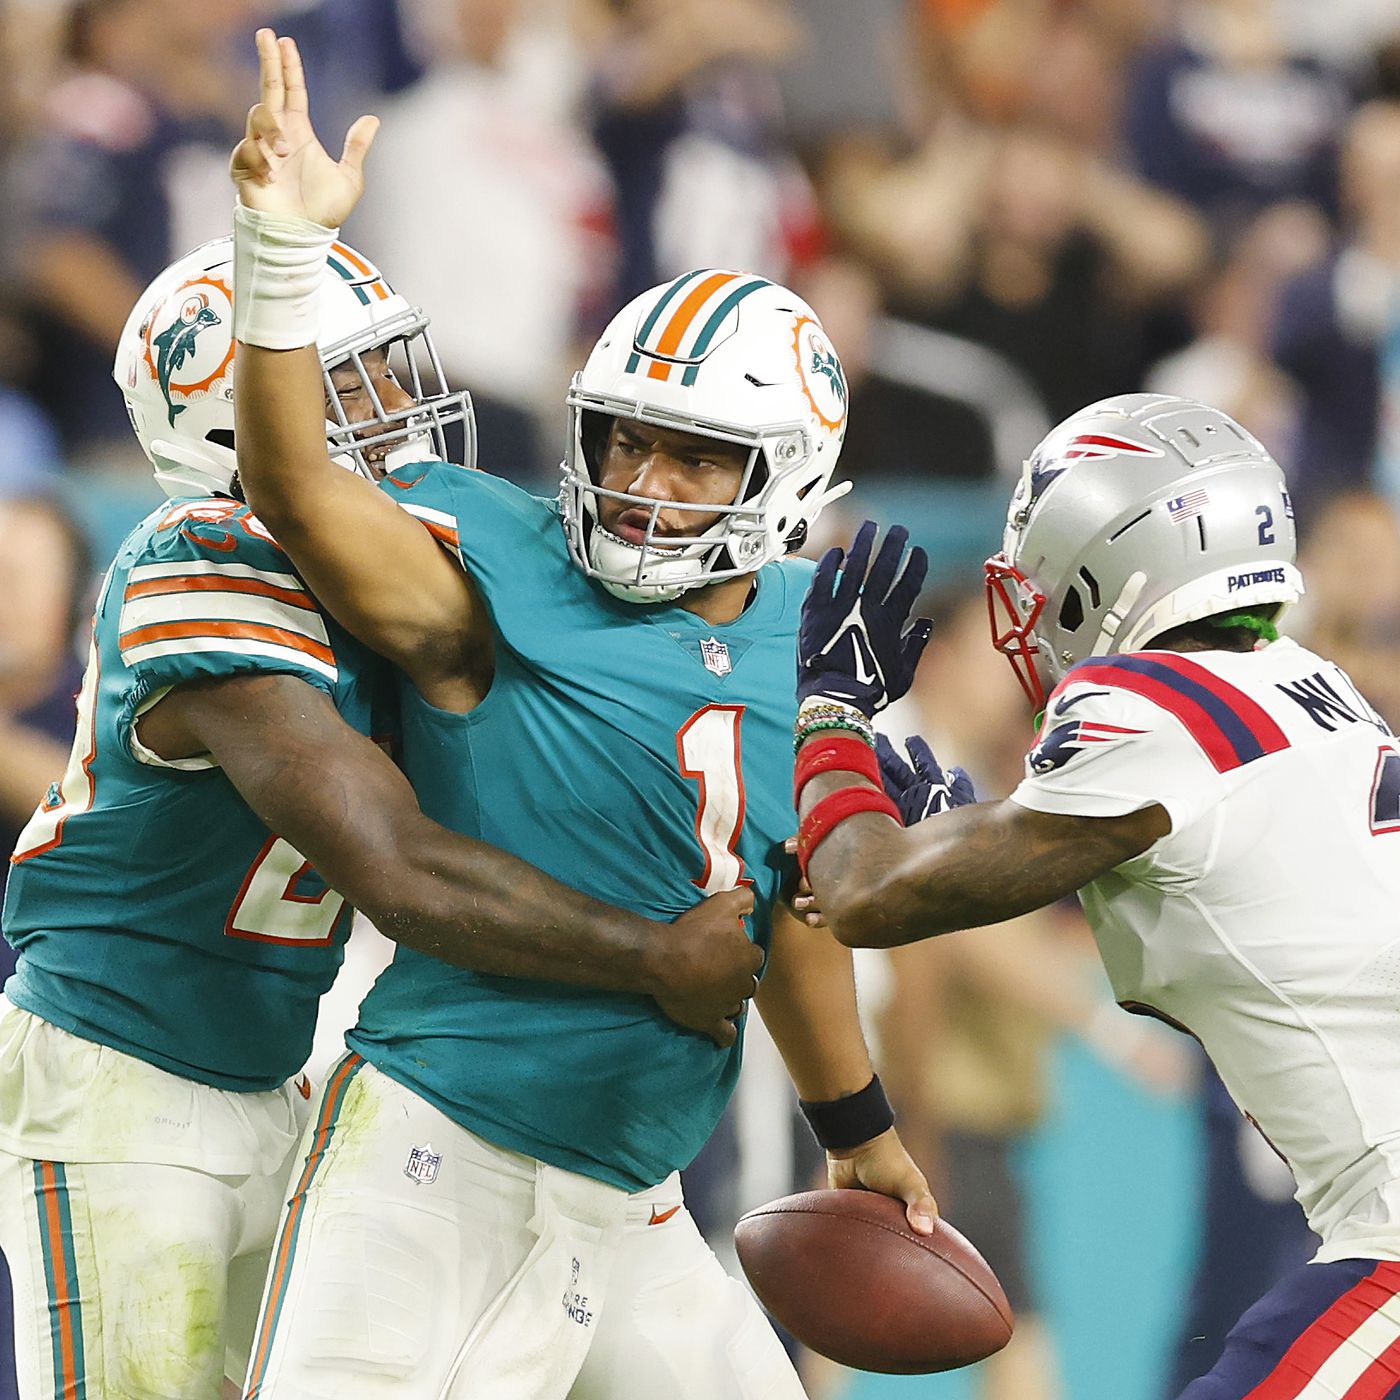 Miami Dolphins Schedule 2022 23 Dolphins 2022 Schedule: Opponents Set For Next Year - The Phinsider